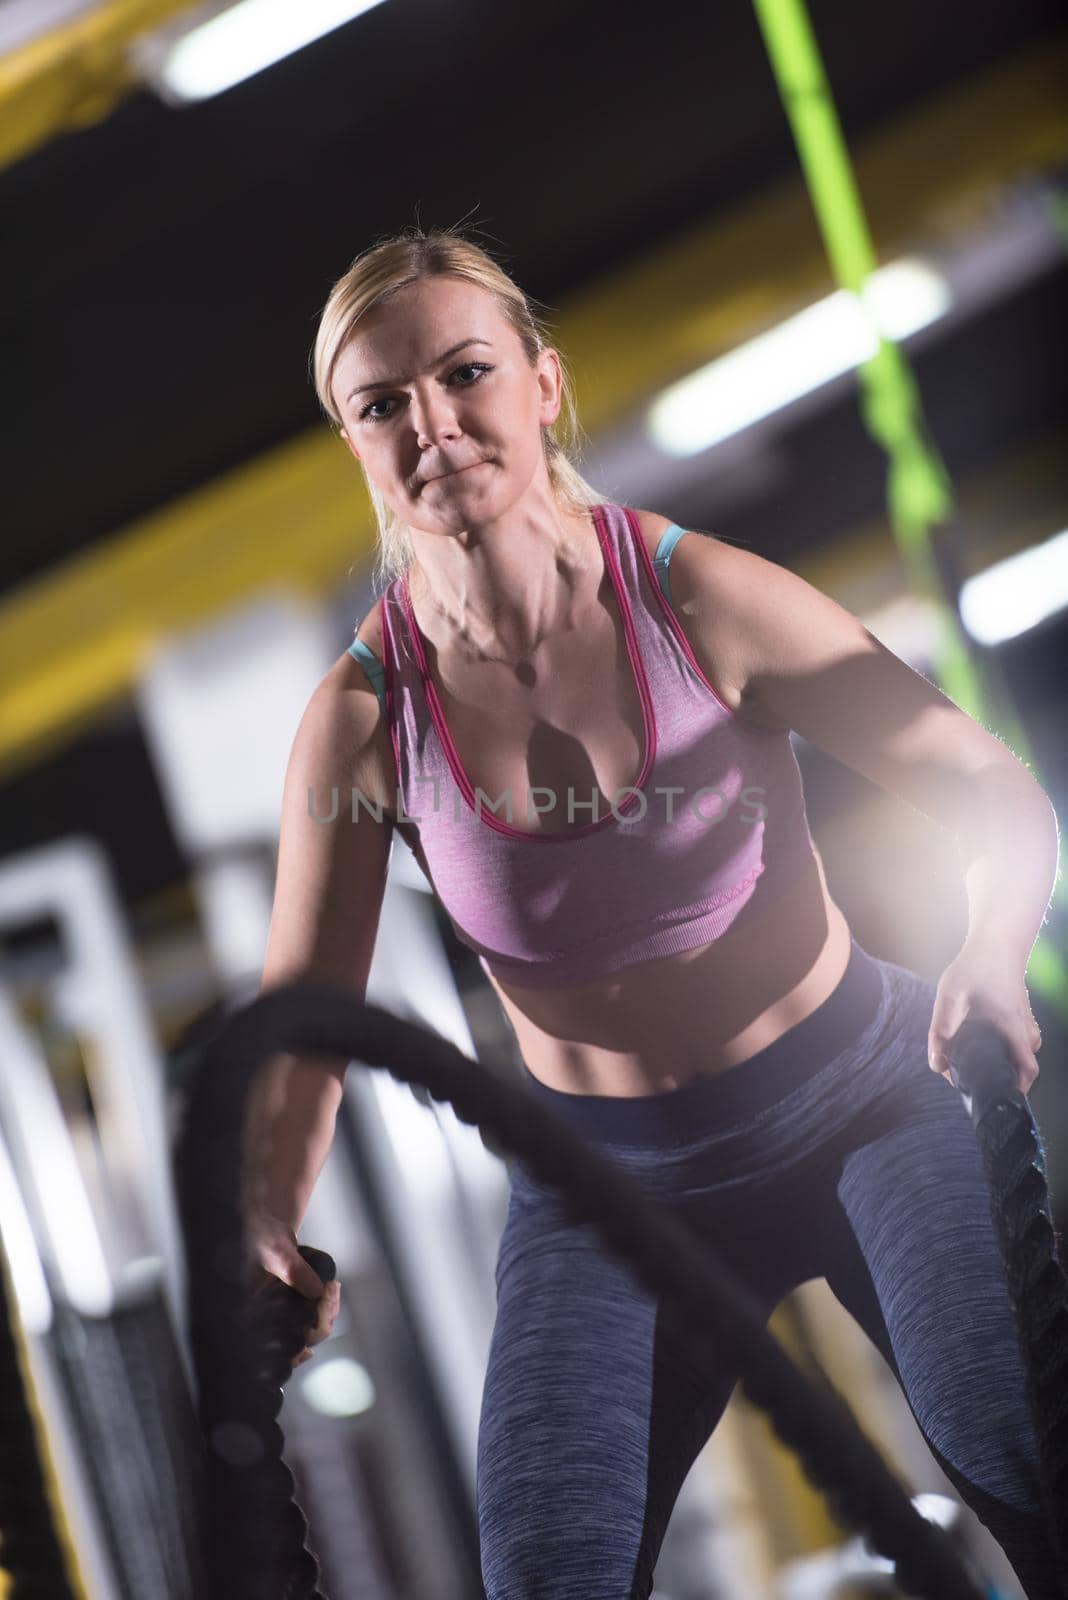 young fit athlete woman working out in functional training gym doing  battle ropes exercise as part of cross fitness training